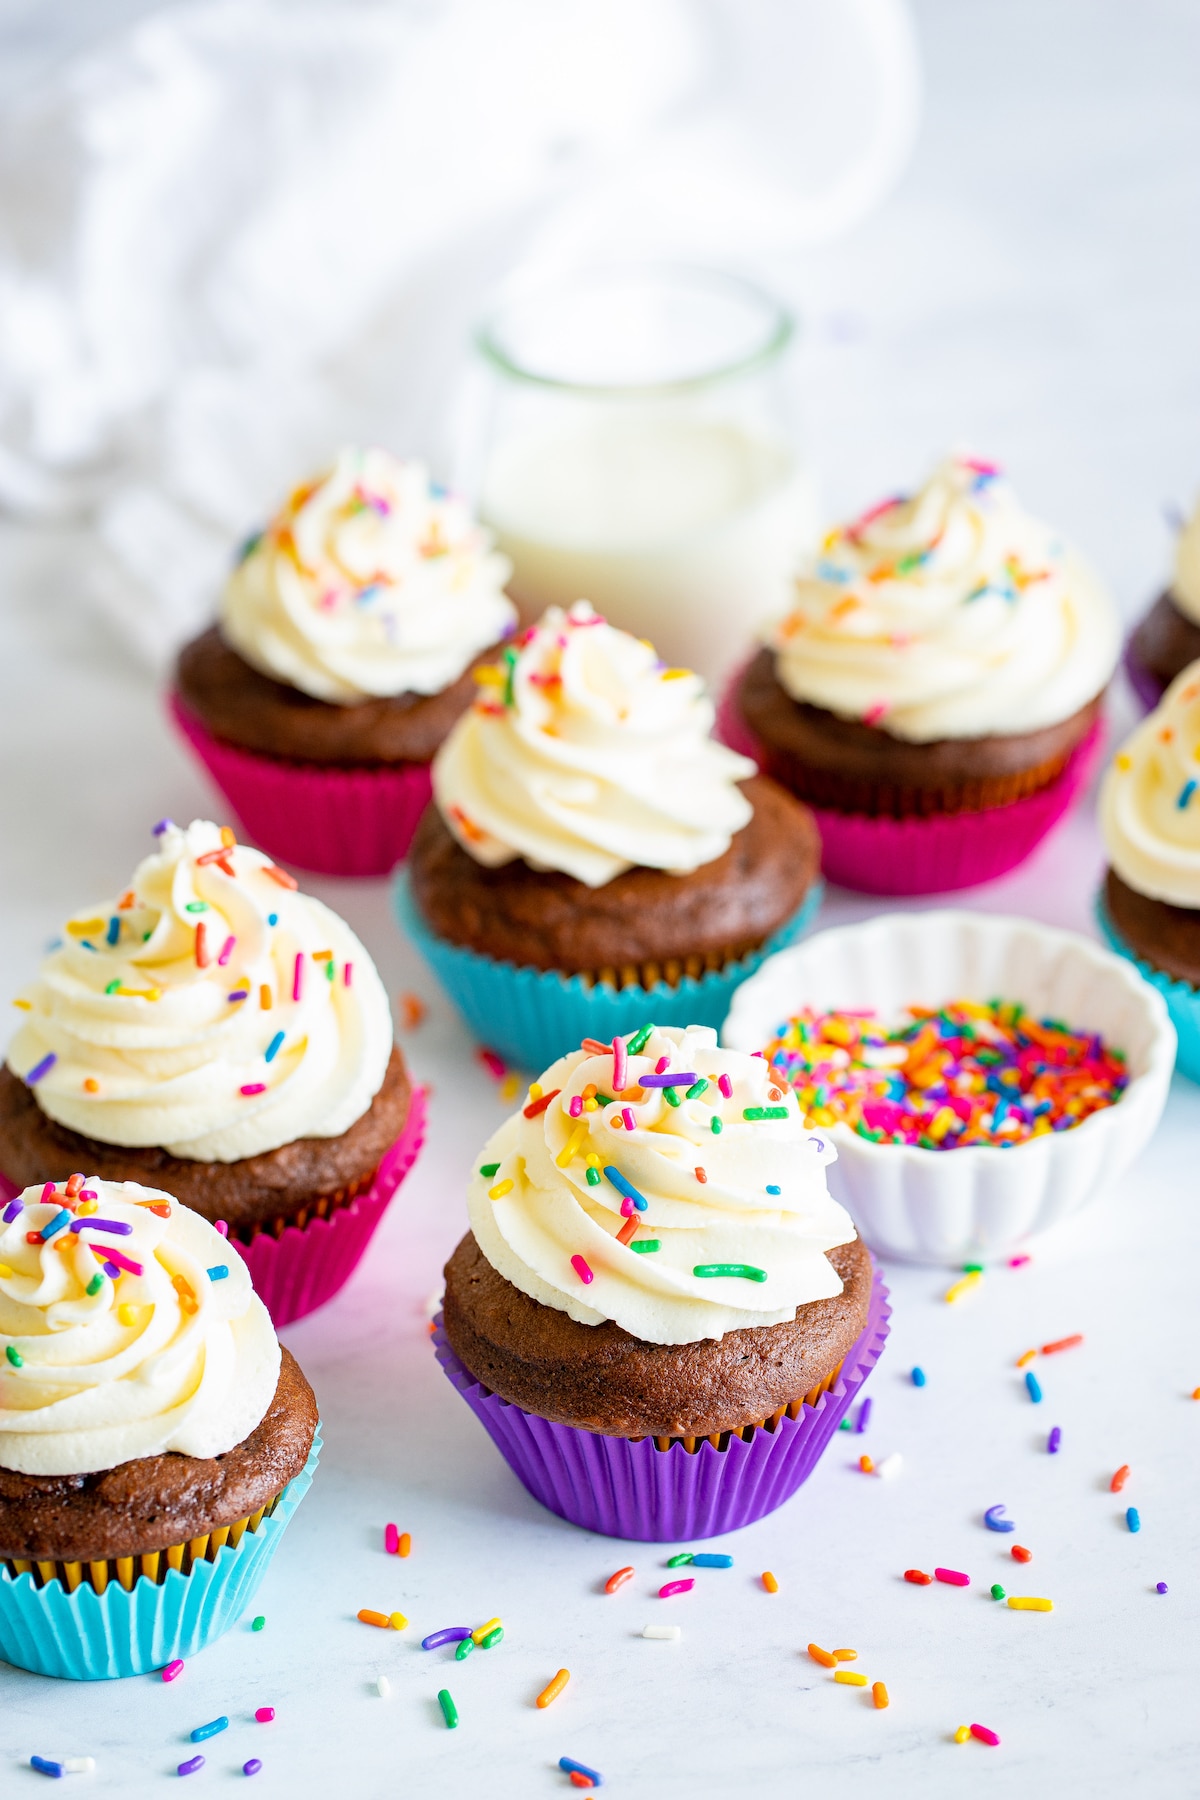 chocolate cupcake in colorful wrappers with vanilla frosting and colorful sprinkles.